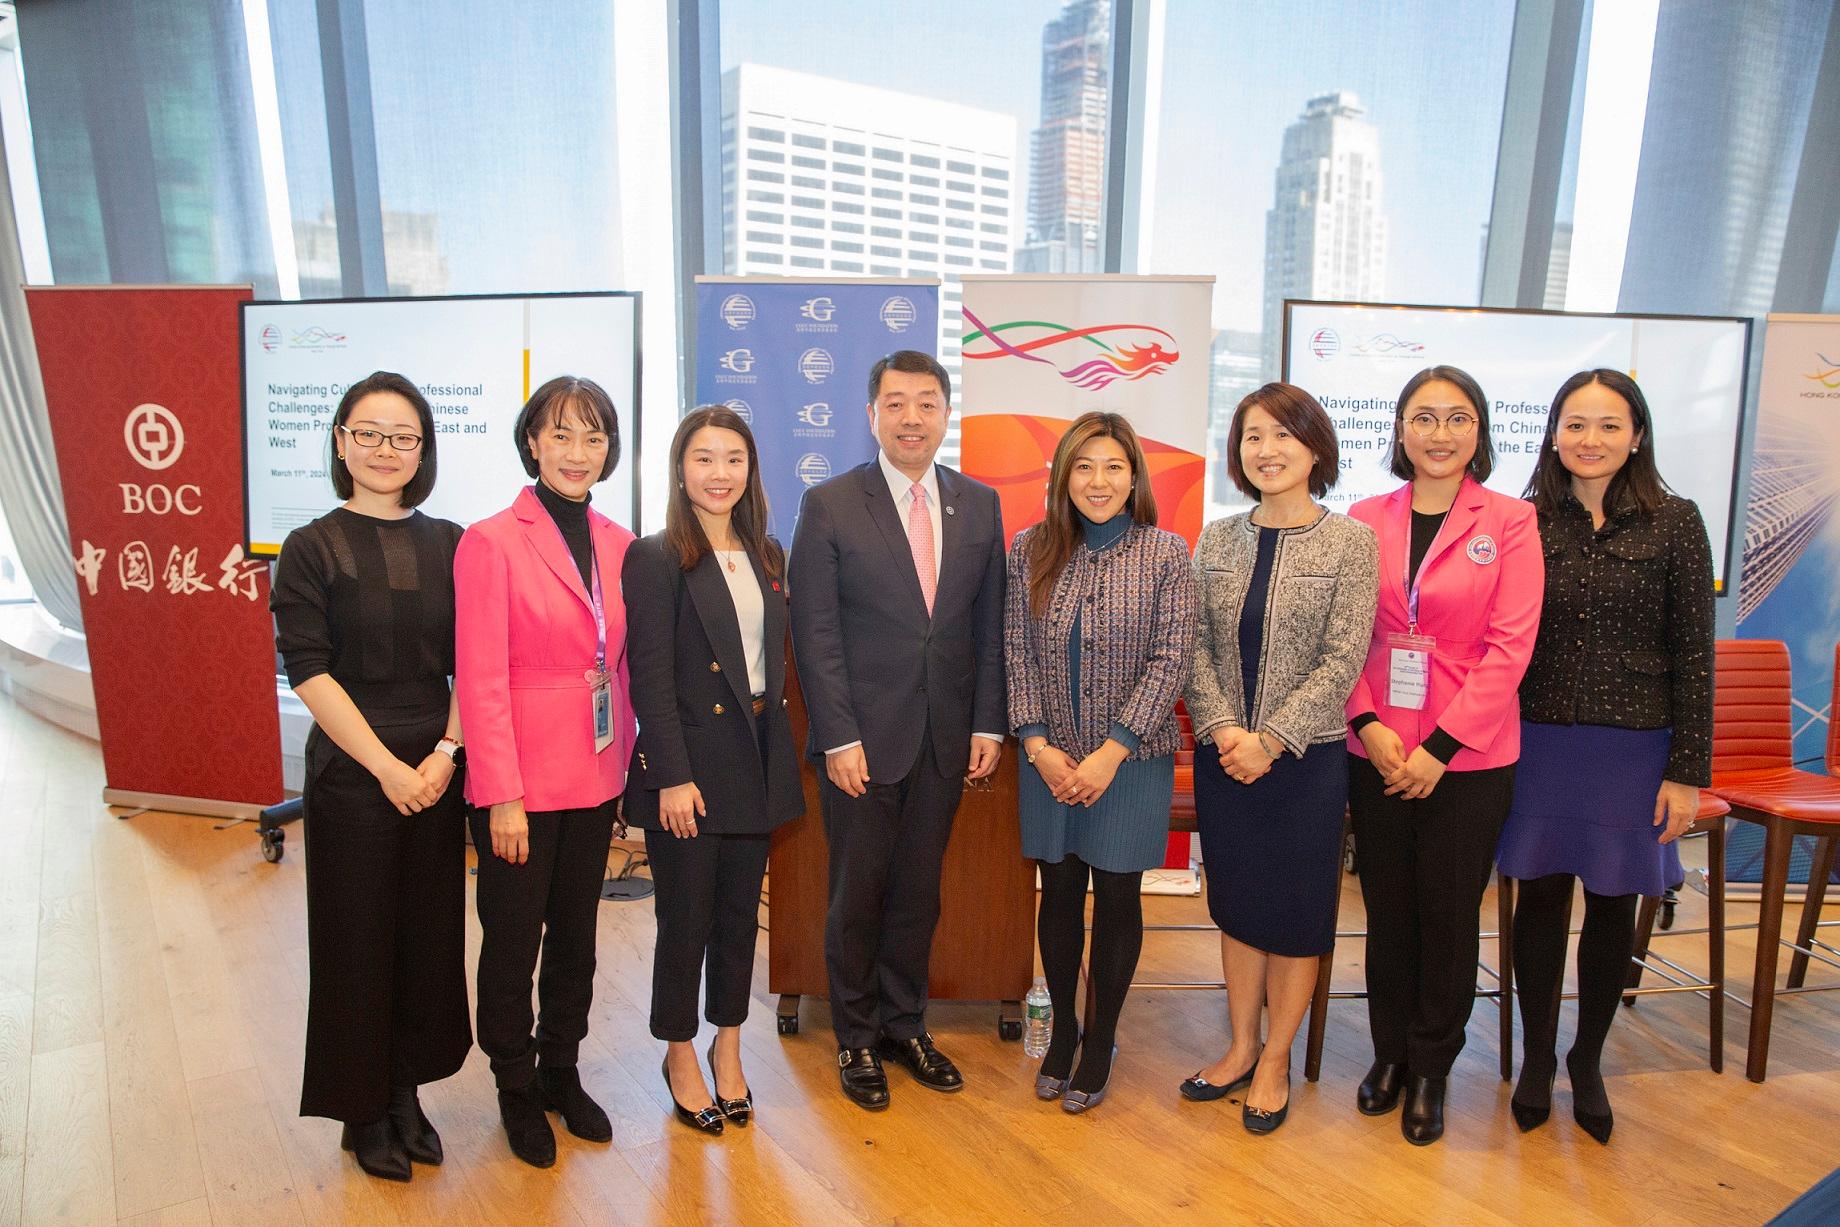 Coinciding with the 68th session of the United Nations Commission on the Status of Women, the Hong Kong Economic and Trade Office in New York (HKETONY) co-organised a luncheon event themed "Navigating Cultural and Professional Challenges: Insights from Chinese Women Professionals in the East and West" with the China General Chamber of Commerce - USA (CGCC), attracting more than 60 attendees from think tanks, the business community and finance sector in New York. Photo shows the HKETONY Director, Ms Maisie Ho (fourth right), the Chairman of the CGCC cum President and Chief Executive Officer of Bank of China, USA, Mr Hu Wei (fourth left), and other guests at the luncheon.